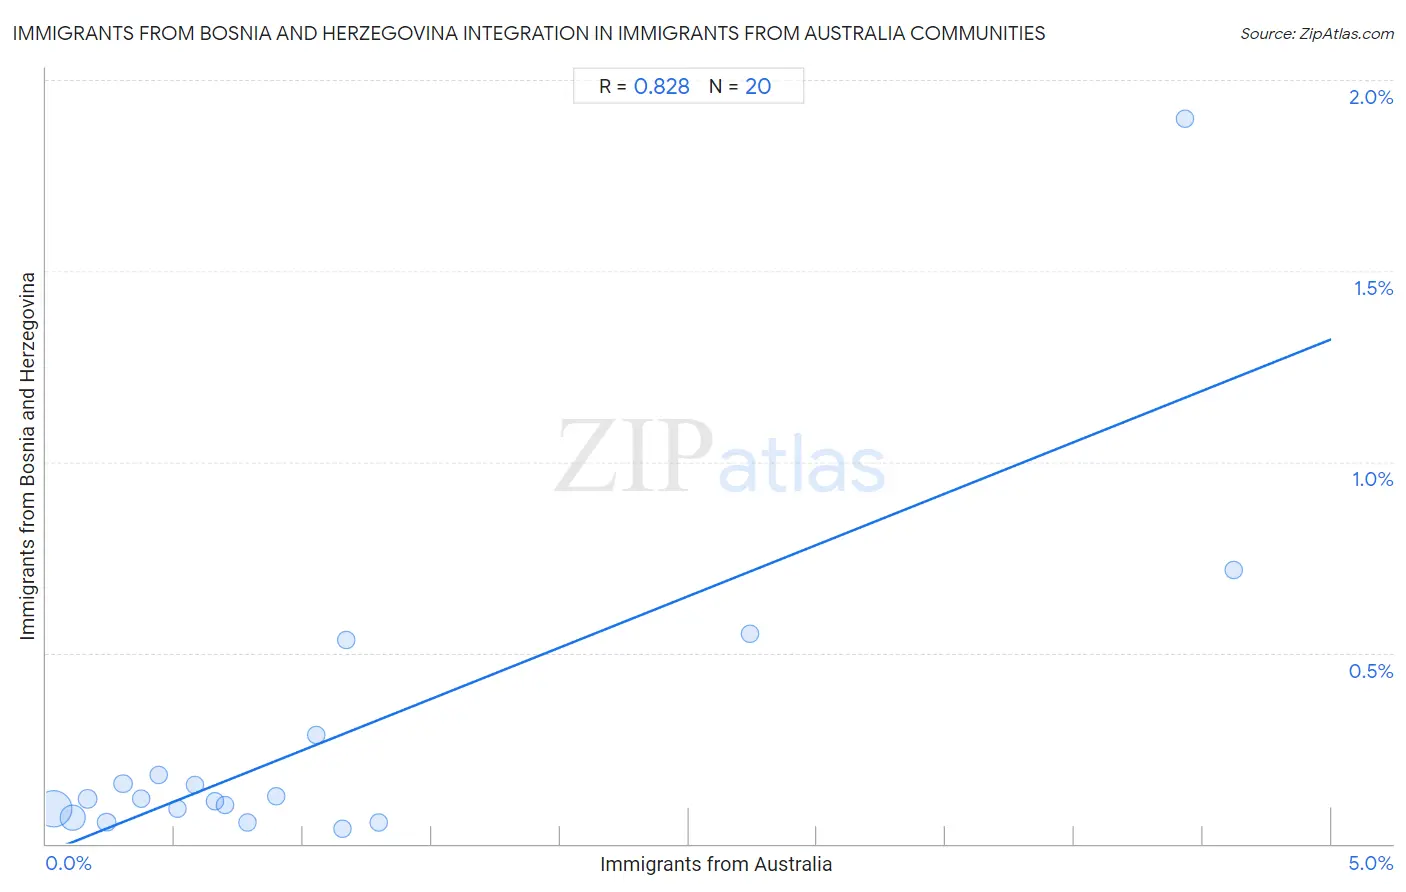 Immigrants from Australia Integration in Immigrants from Bosnia and Herzegovina Communities